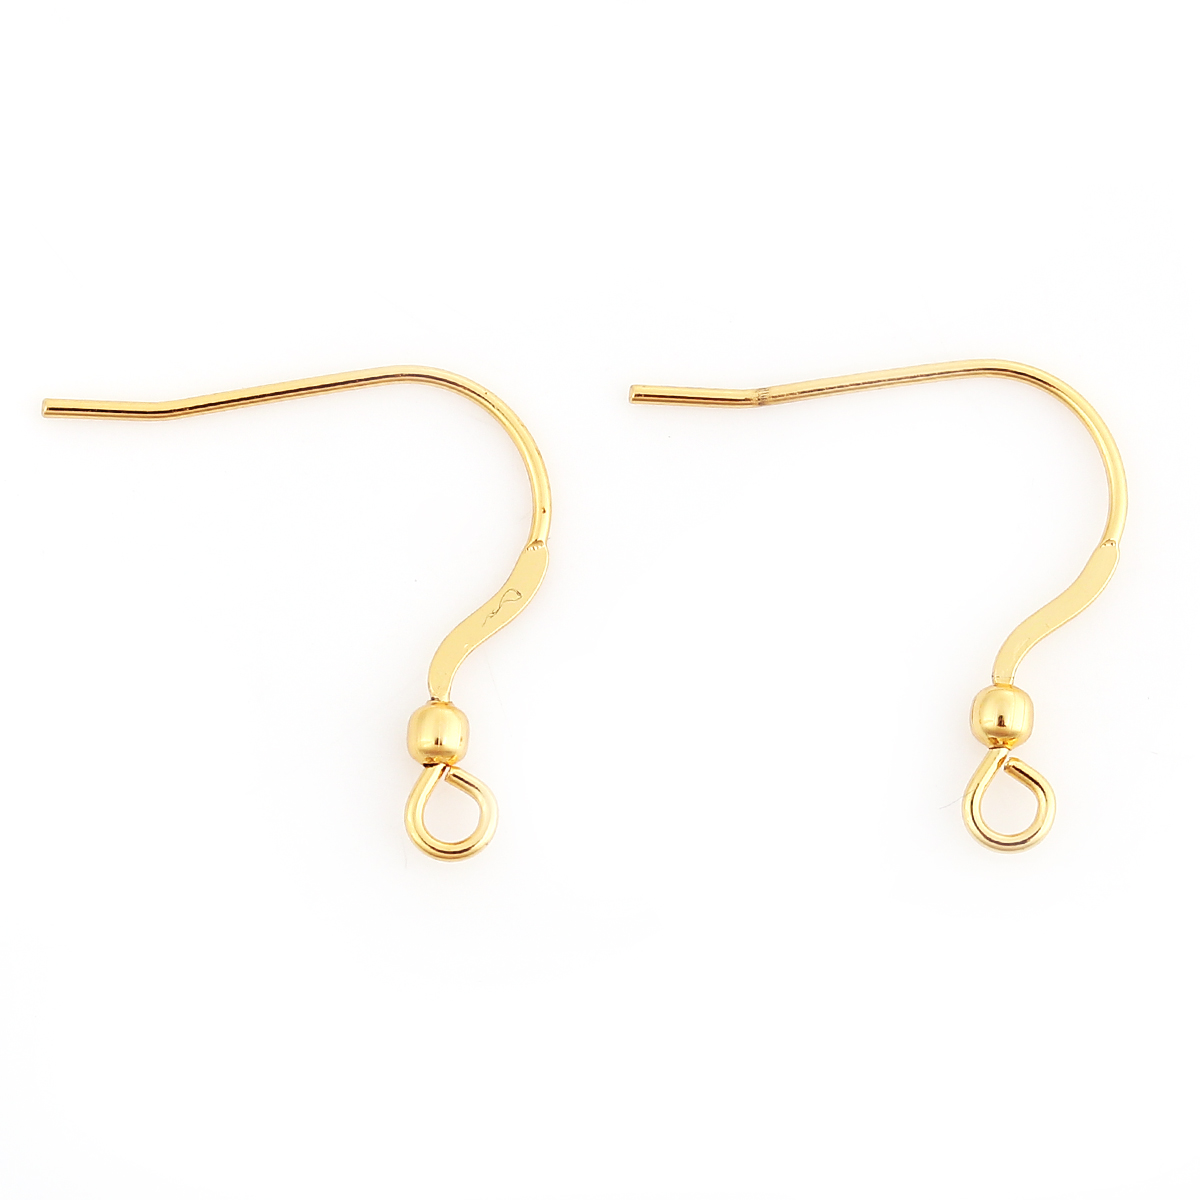 Picture of Stainless Steel Ear Wire Hooks Earring Findings Gold Plated W/ Loop 20mm x19mm( 6/8" x 6/8") - 18mm x15mm( 6/8" x 5/8"), Post/ Wire Size: (21 gauge), 10 PCs